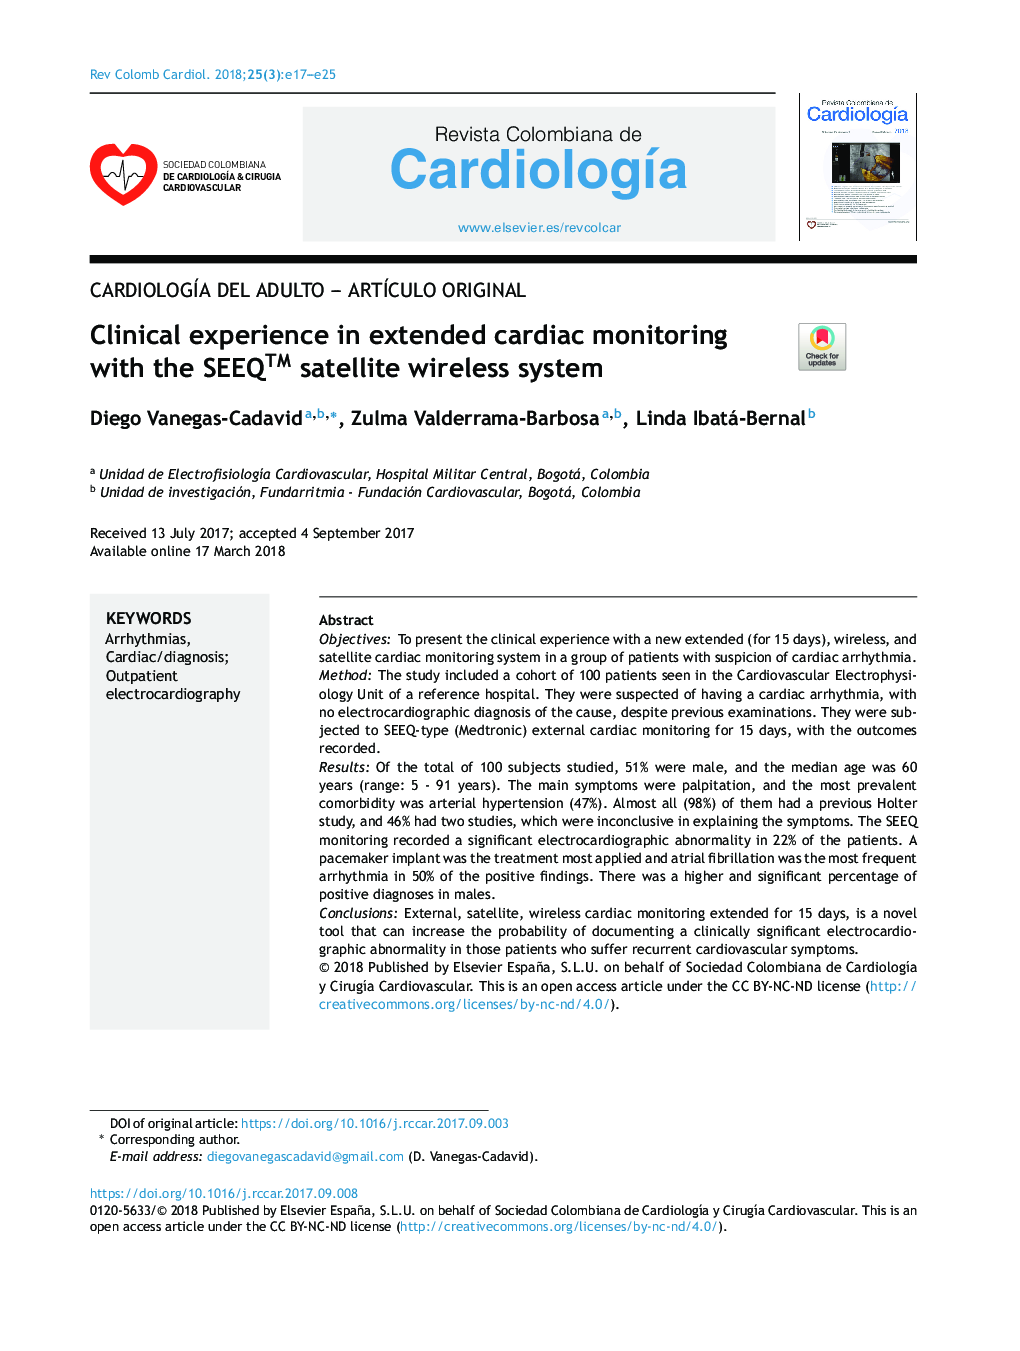 Clinical experience in extended cardiac monitoring with the SEEQâ¢ satellite wireless system